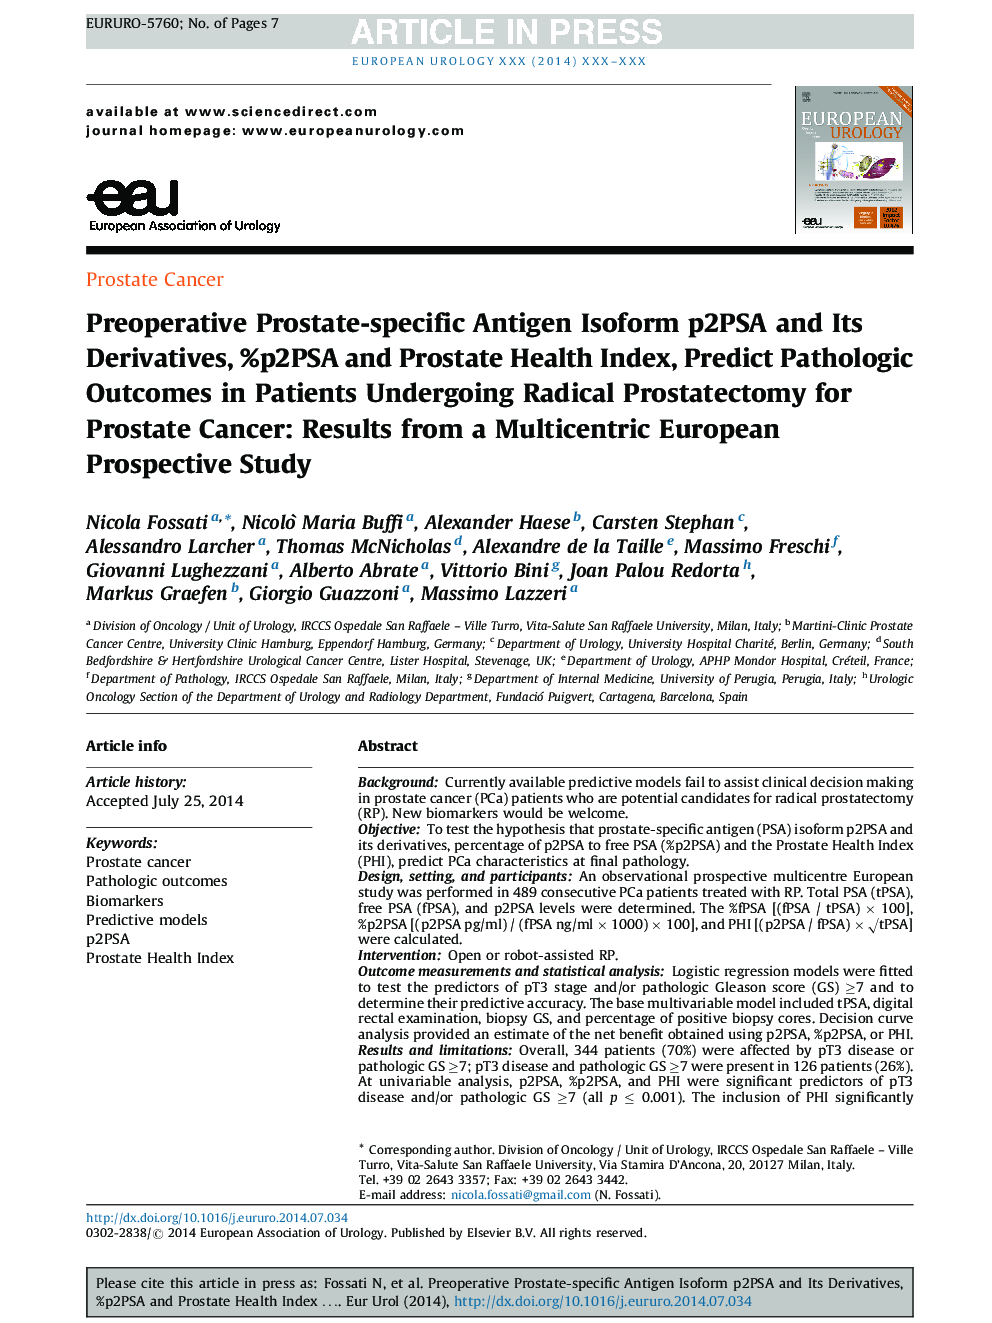 Preoperative Prostate-specific Antigen Isoform p2PSA and Its Derivatives, %p2PSA and Prostate Health Index, Predict Pathologic Outcomes in Patients Undergoing Radical Prostatectomy for Prostate Cancer: Results from a Multicentric European Prospective Stud